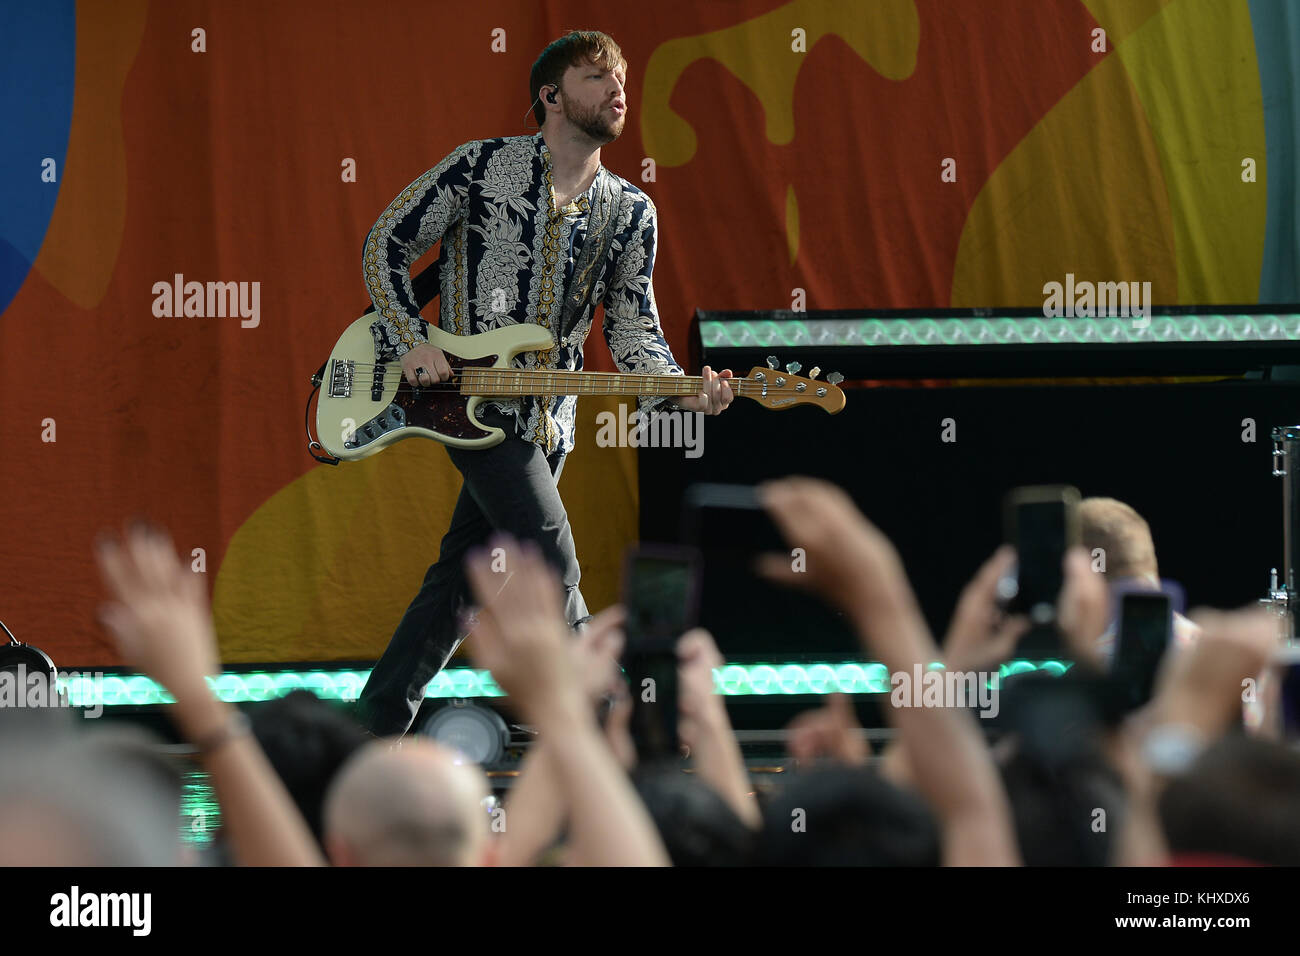 NEW YORK, NY - JULY 28: Lead singer Dan Reynolds and his band Imagine Dragons perform on ABC's 'Good Morning America' at Rumsey Playfield on July 28, 2017 in New York City.  People:  Dan Reynolds Stock Photo